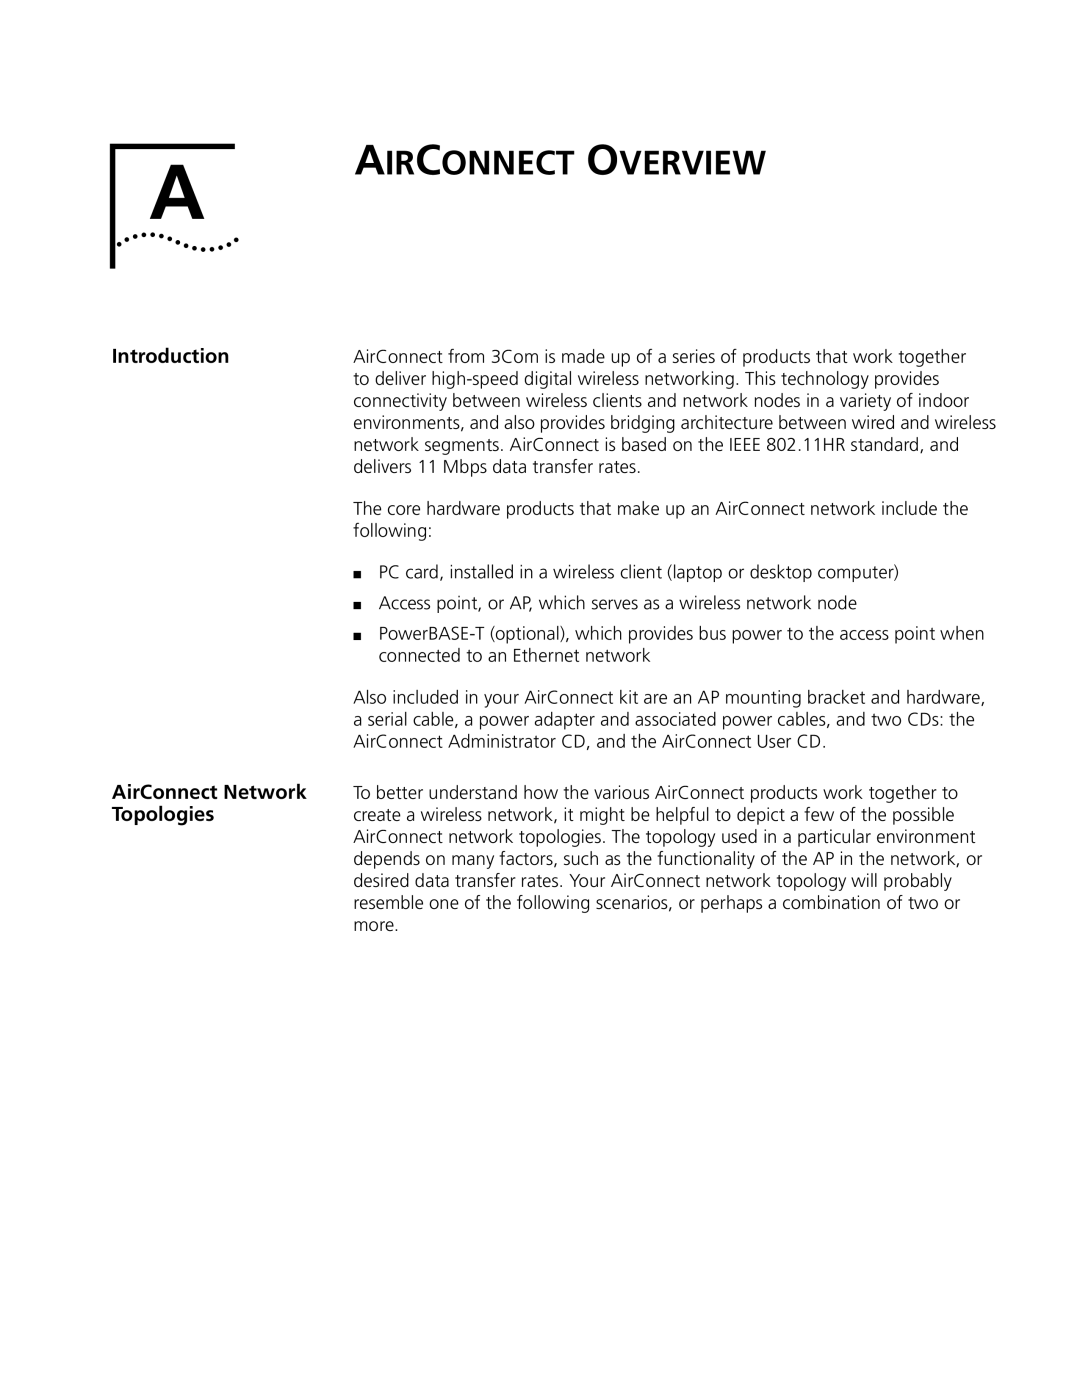 3Com 09-1765-001 manual Airconnect Overview, AirConnect Network, Topologies, Introduction 